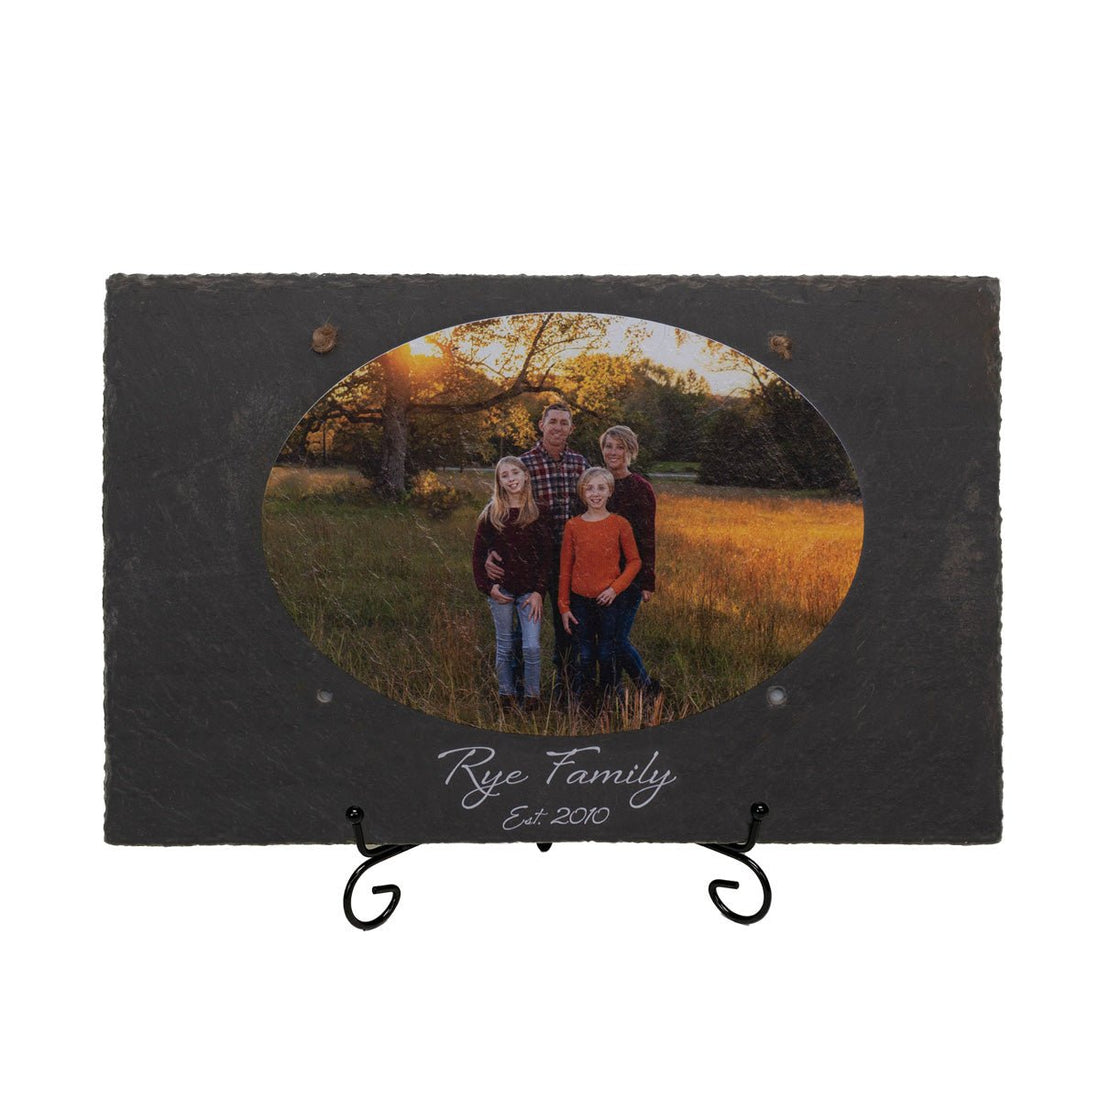 Personalized UV Printed Image (Landscape Format) Text on 9.75"x15.75" Beautiful Charcoal Slate 